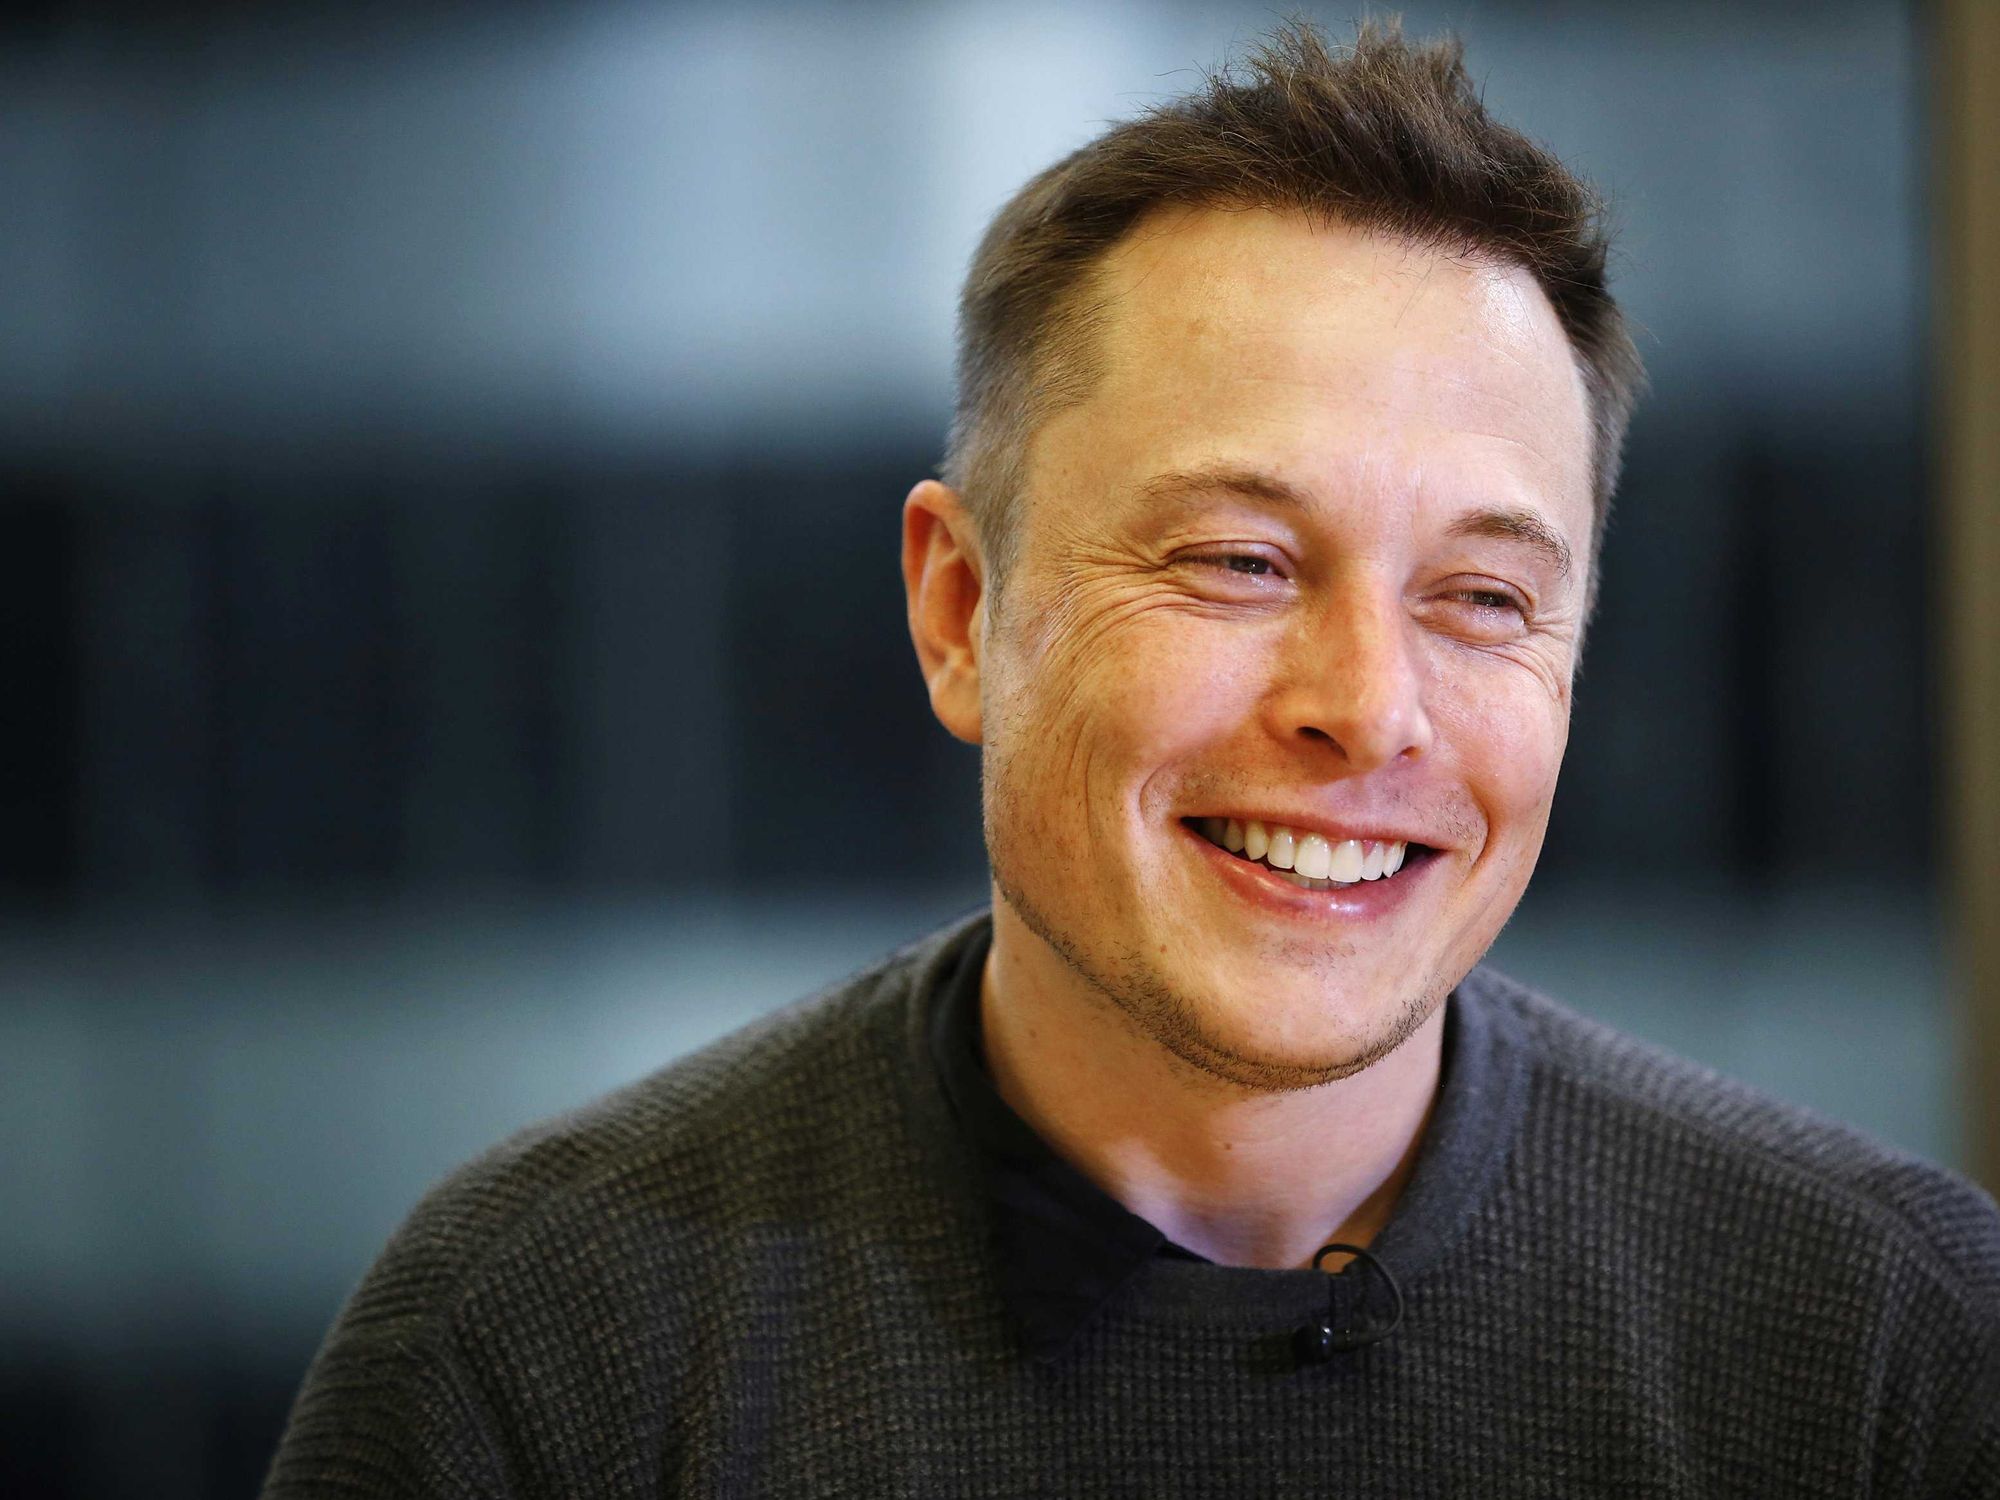 Elon Musk sold Tesla shares for another $ 963 million and is considering quitting and becoming a blogger